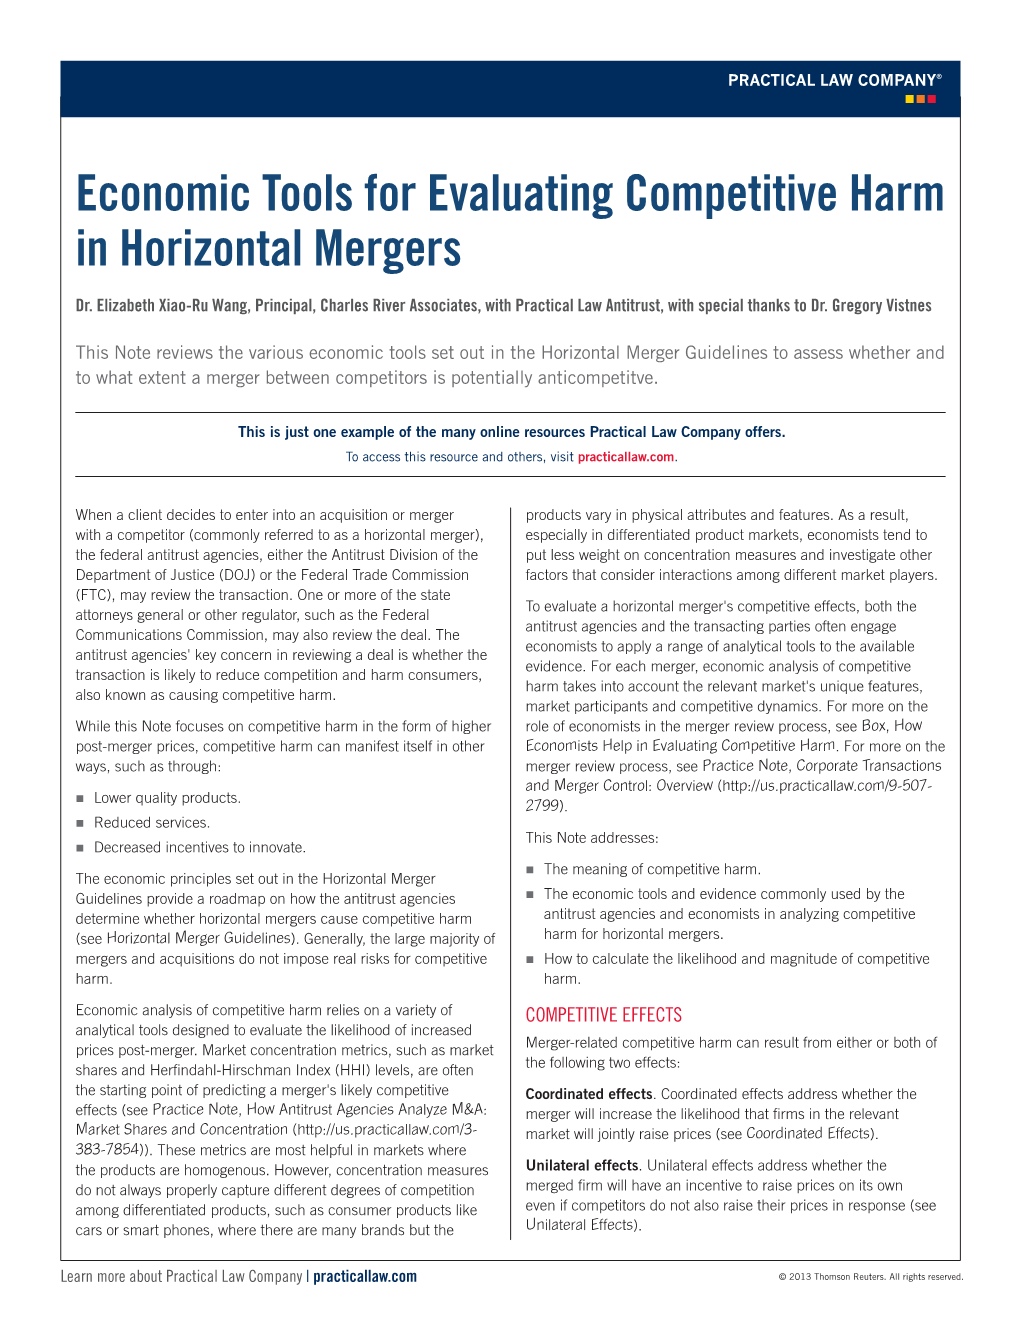 Economic Tools for Evaluating Competitive Harm in Horizontal Mergers